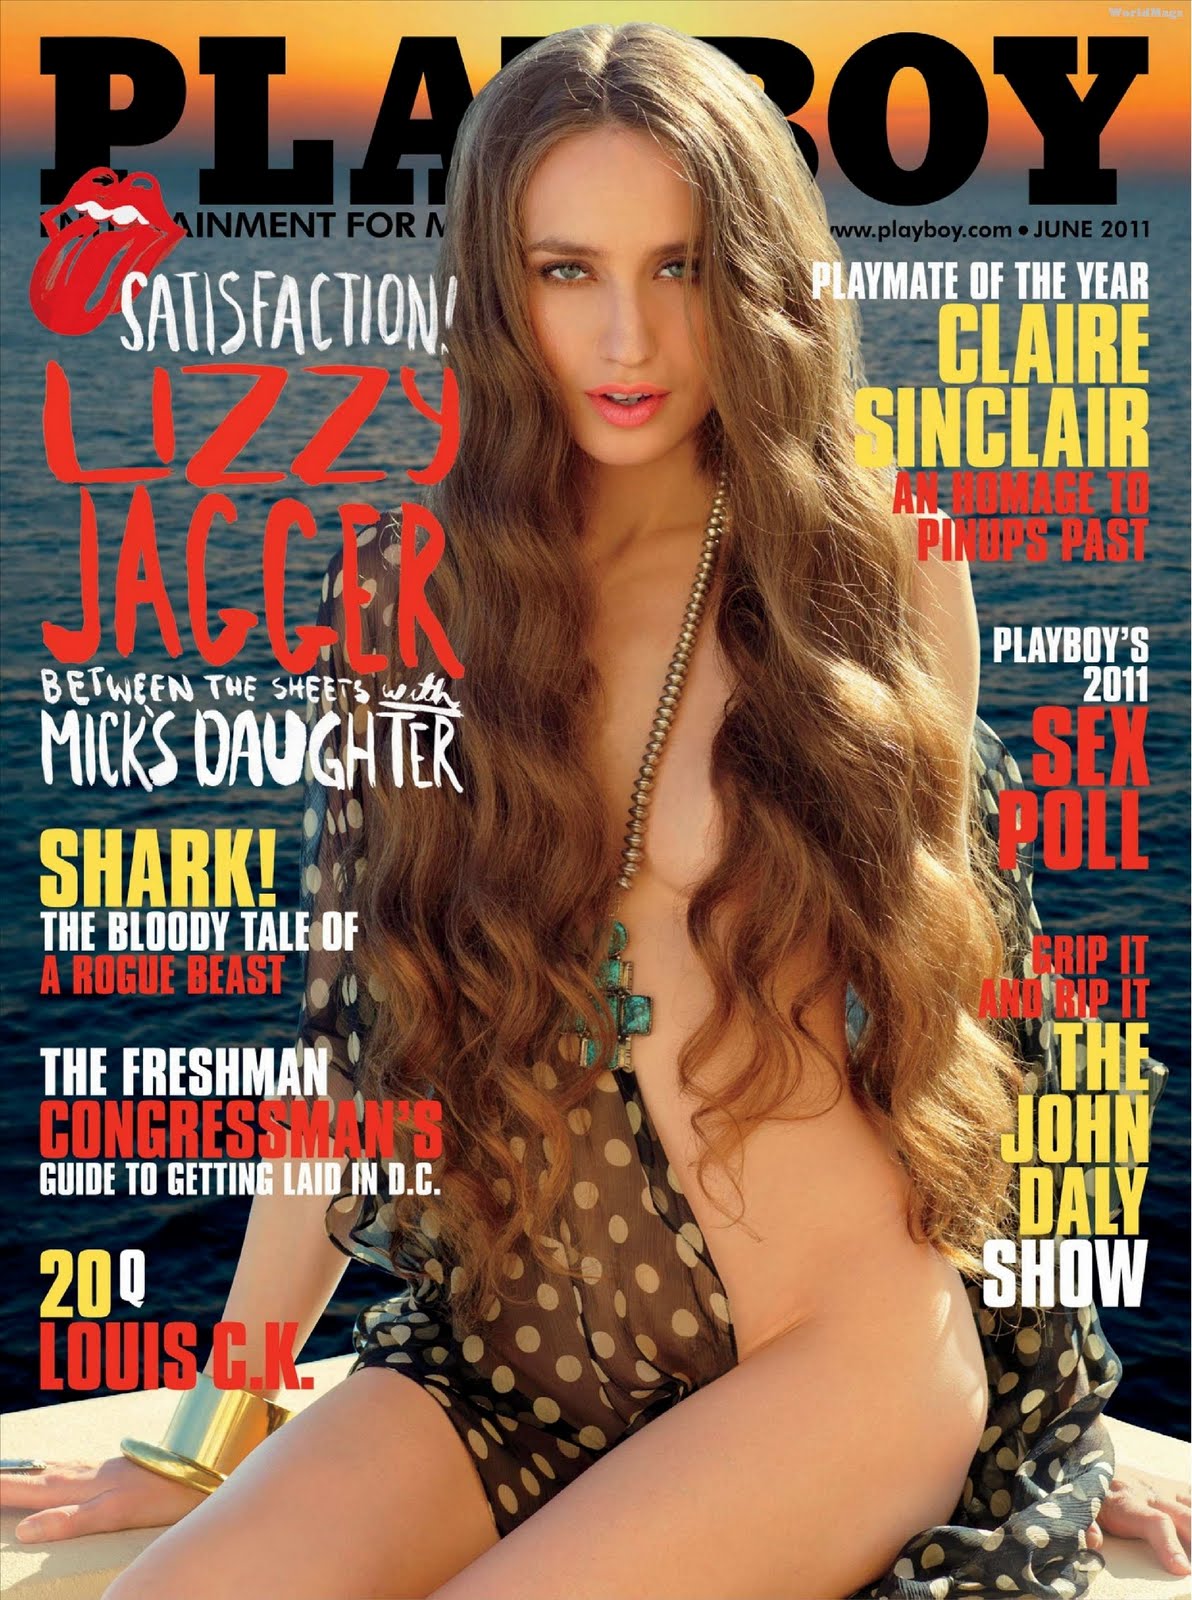 Lizzy Jagger naked in Playboy Magazine